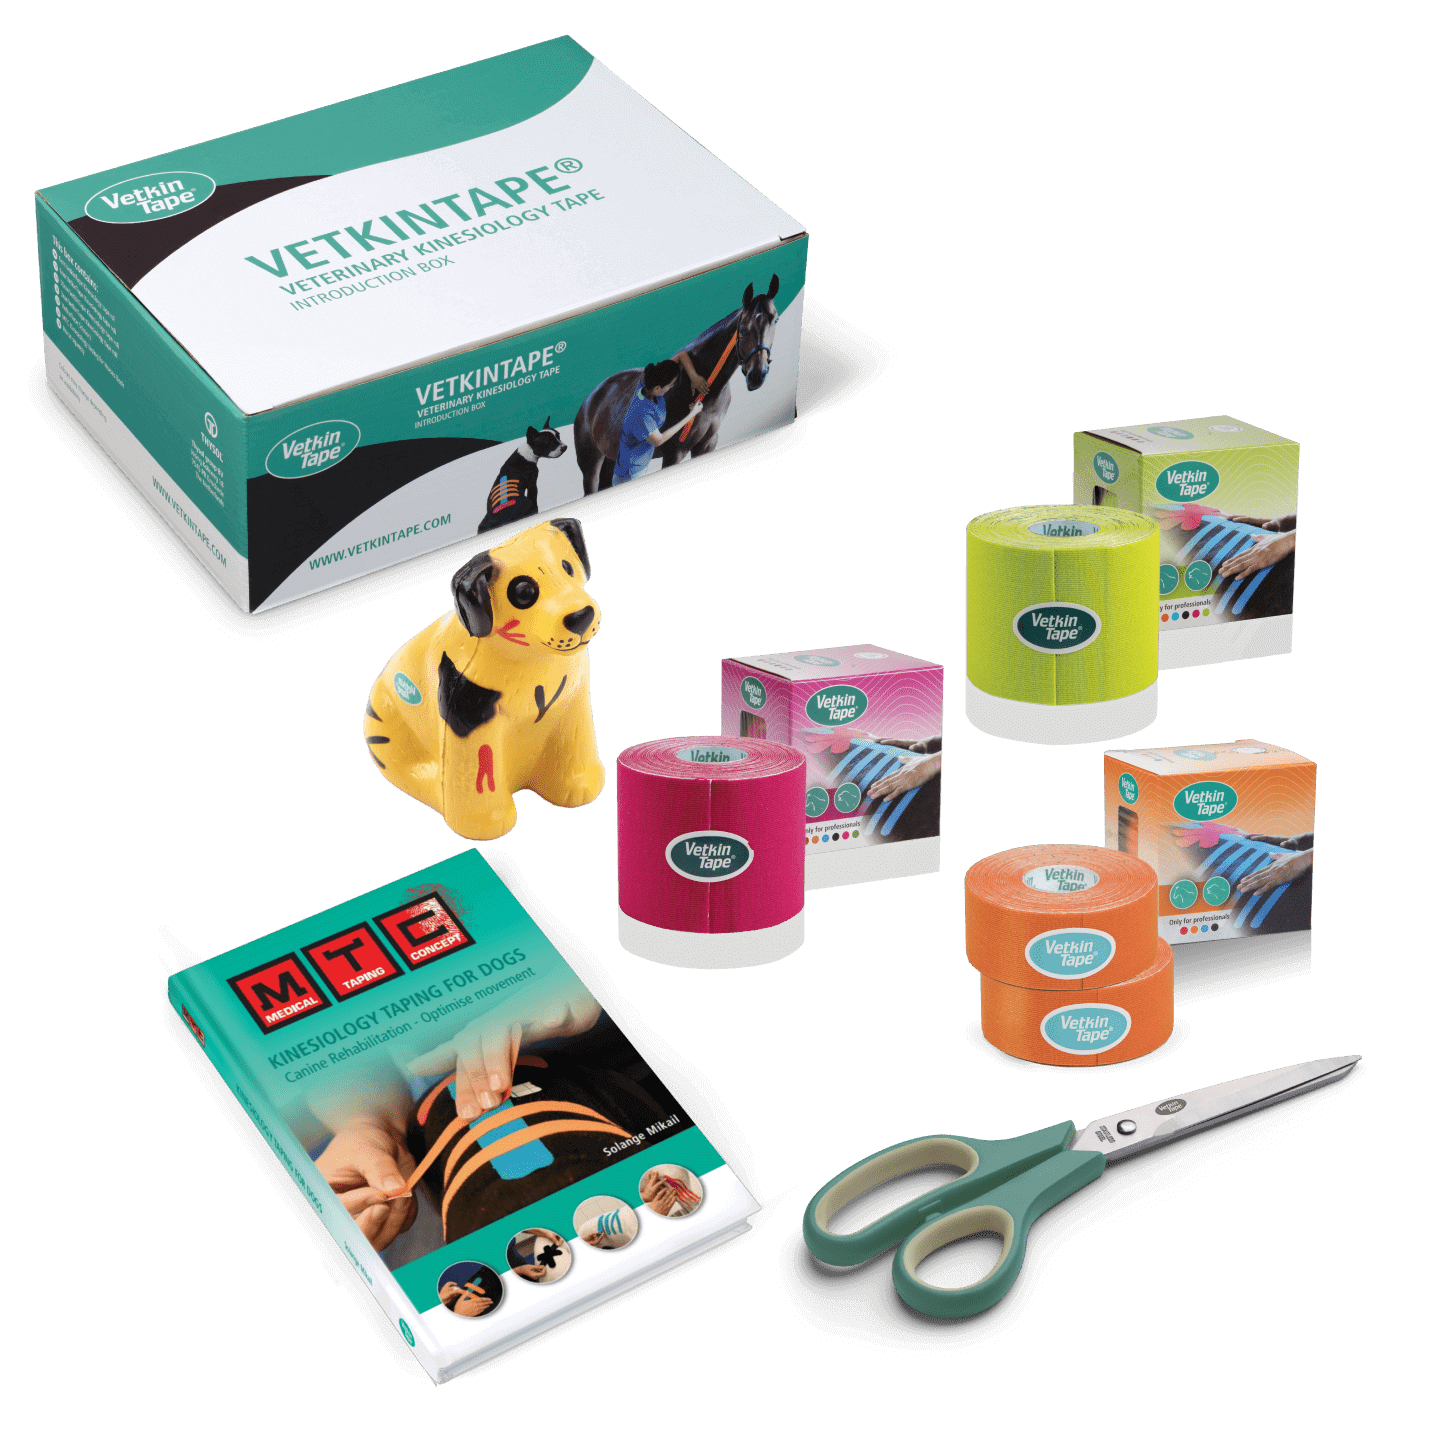 VetkinTape® Canine Introductory Offer